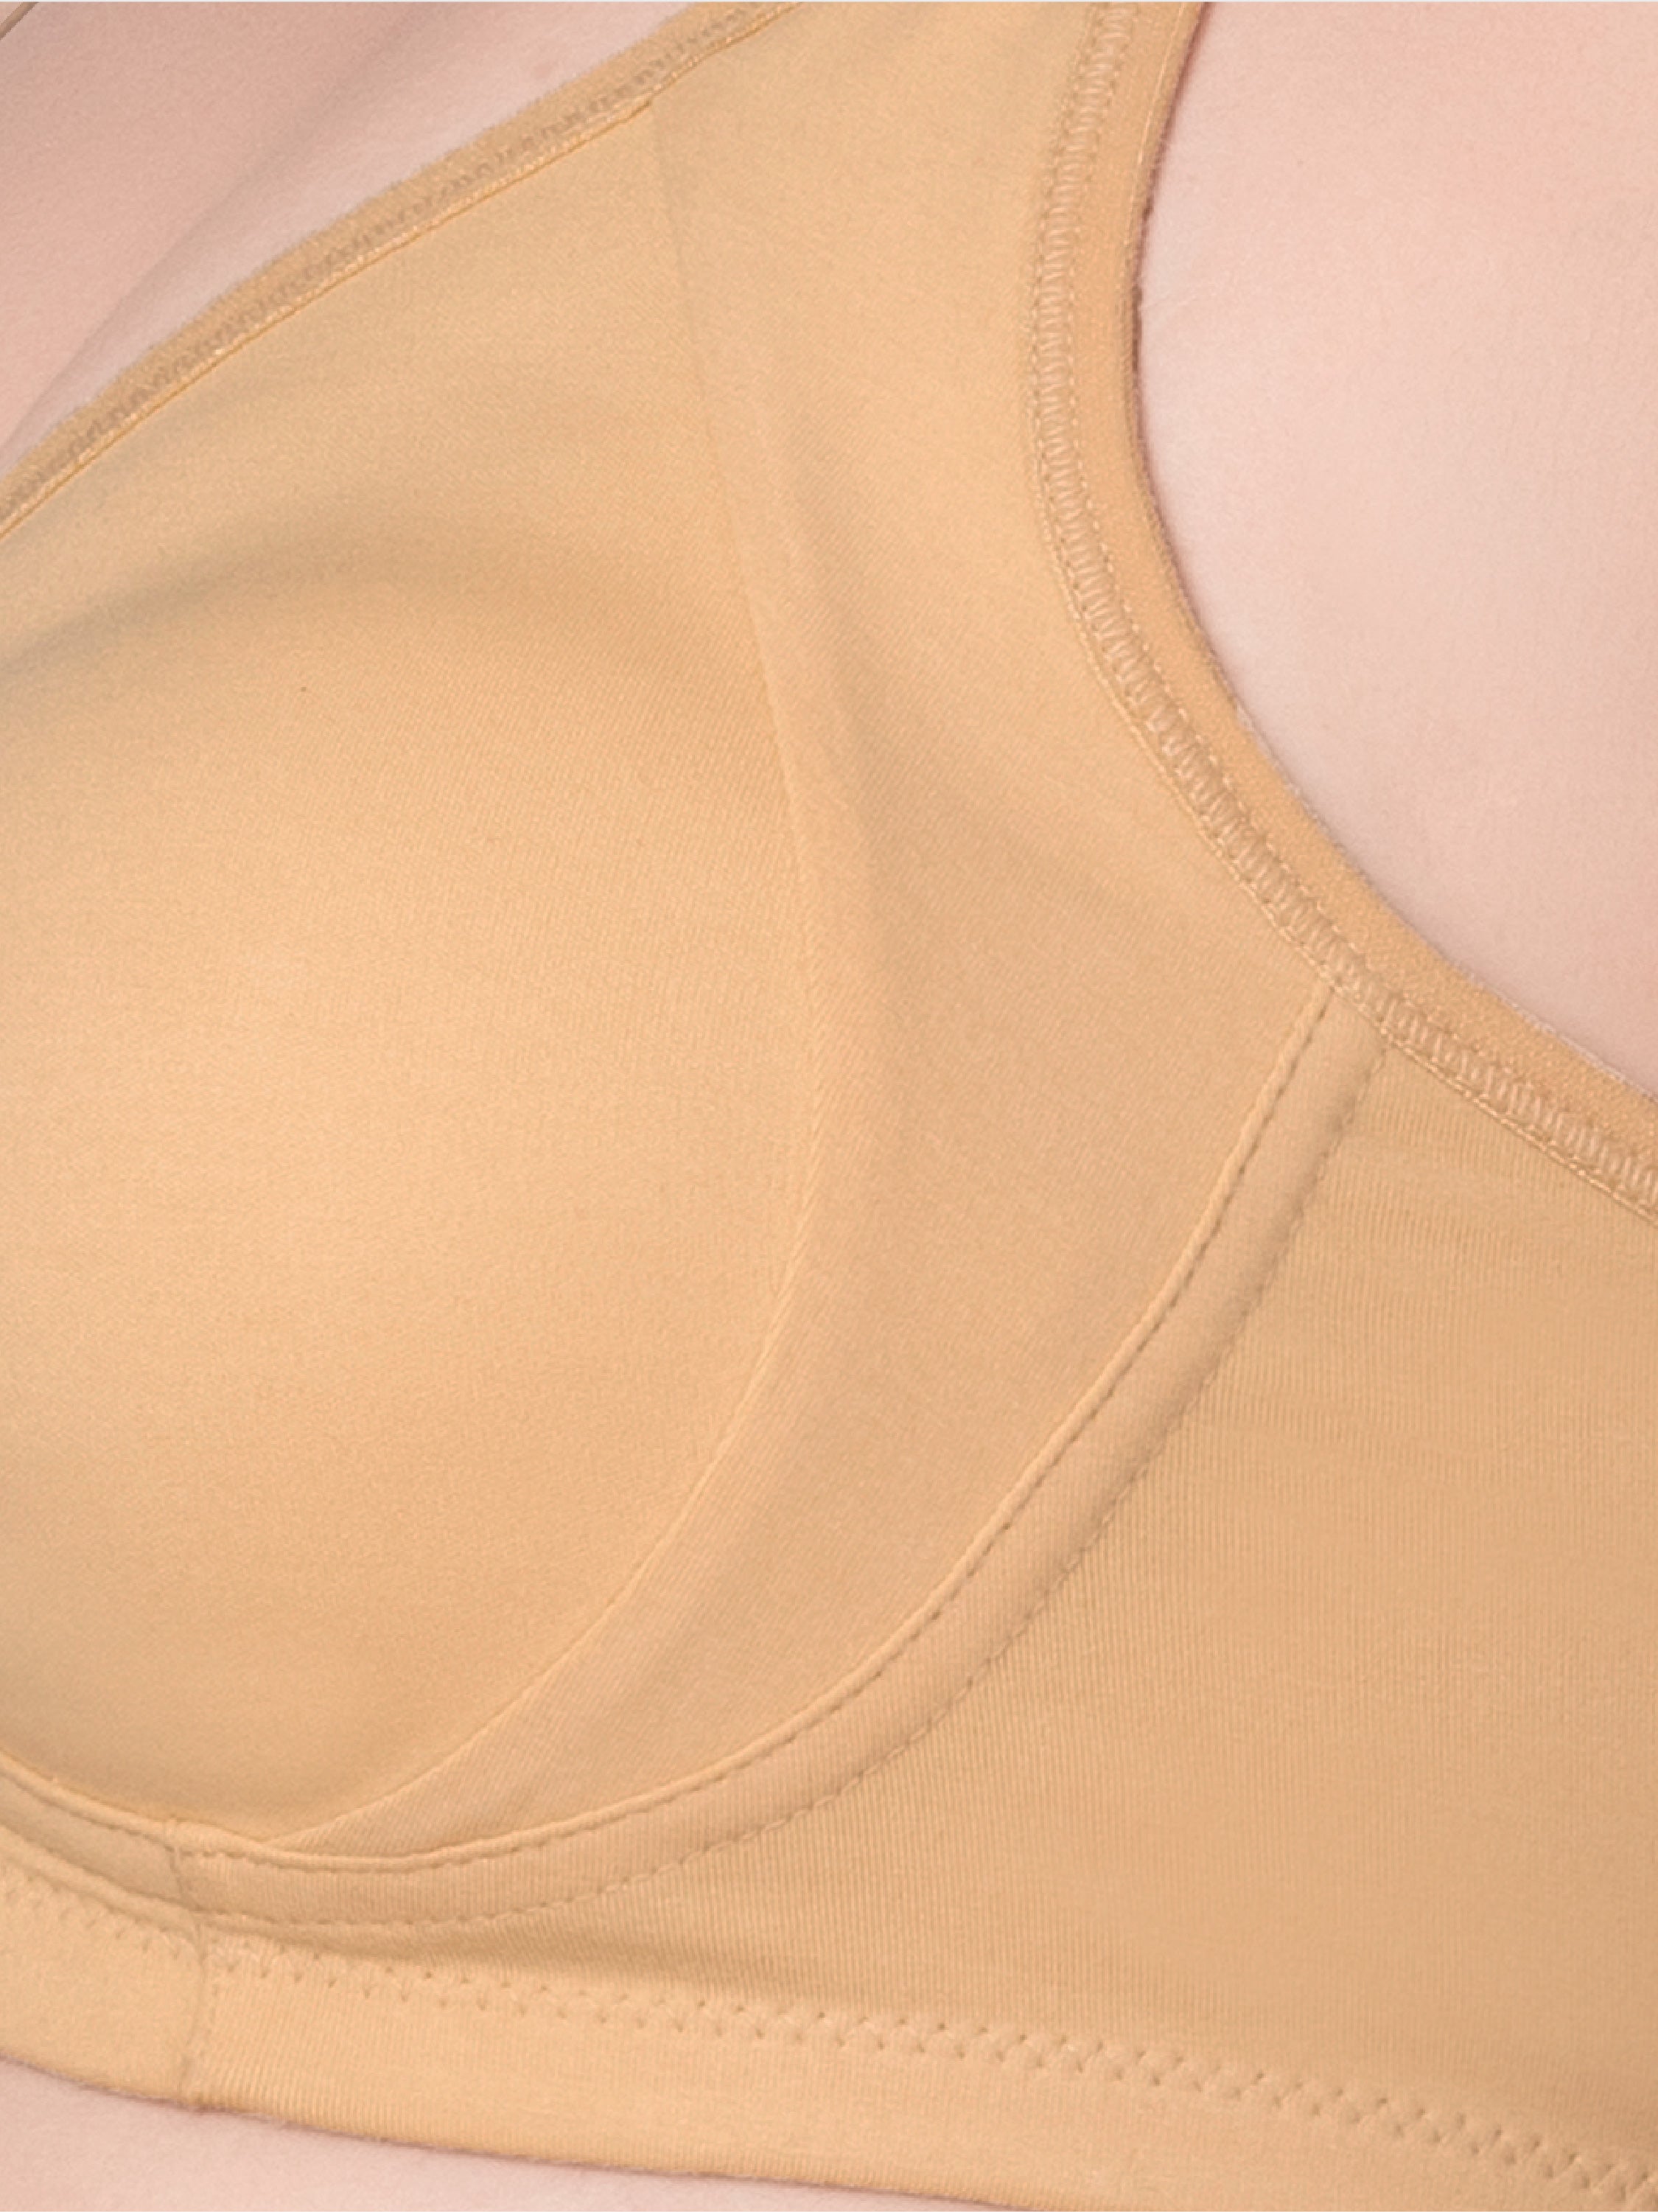 Daisy Dee Skin Lightly Padded Non Wired Full Coverage Bra - NZNTH-Skin